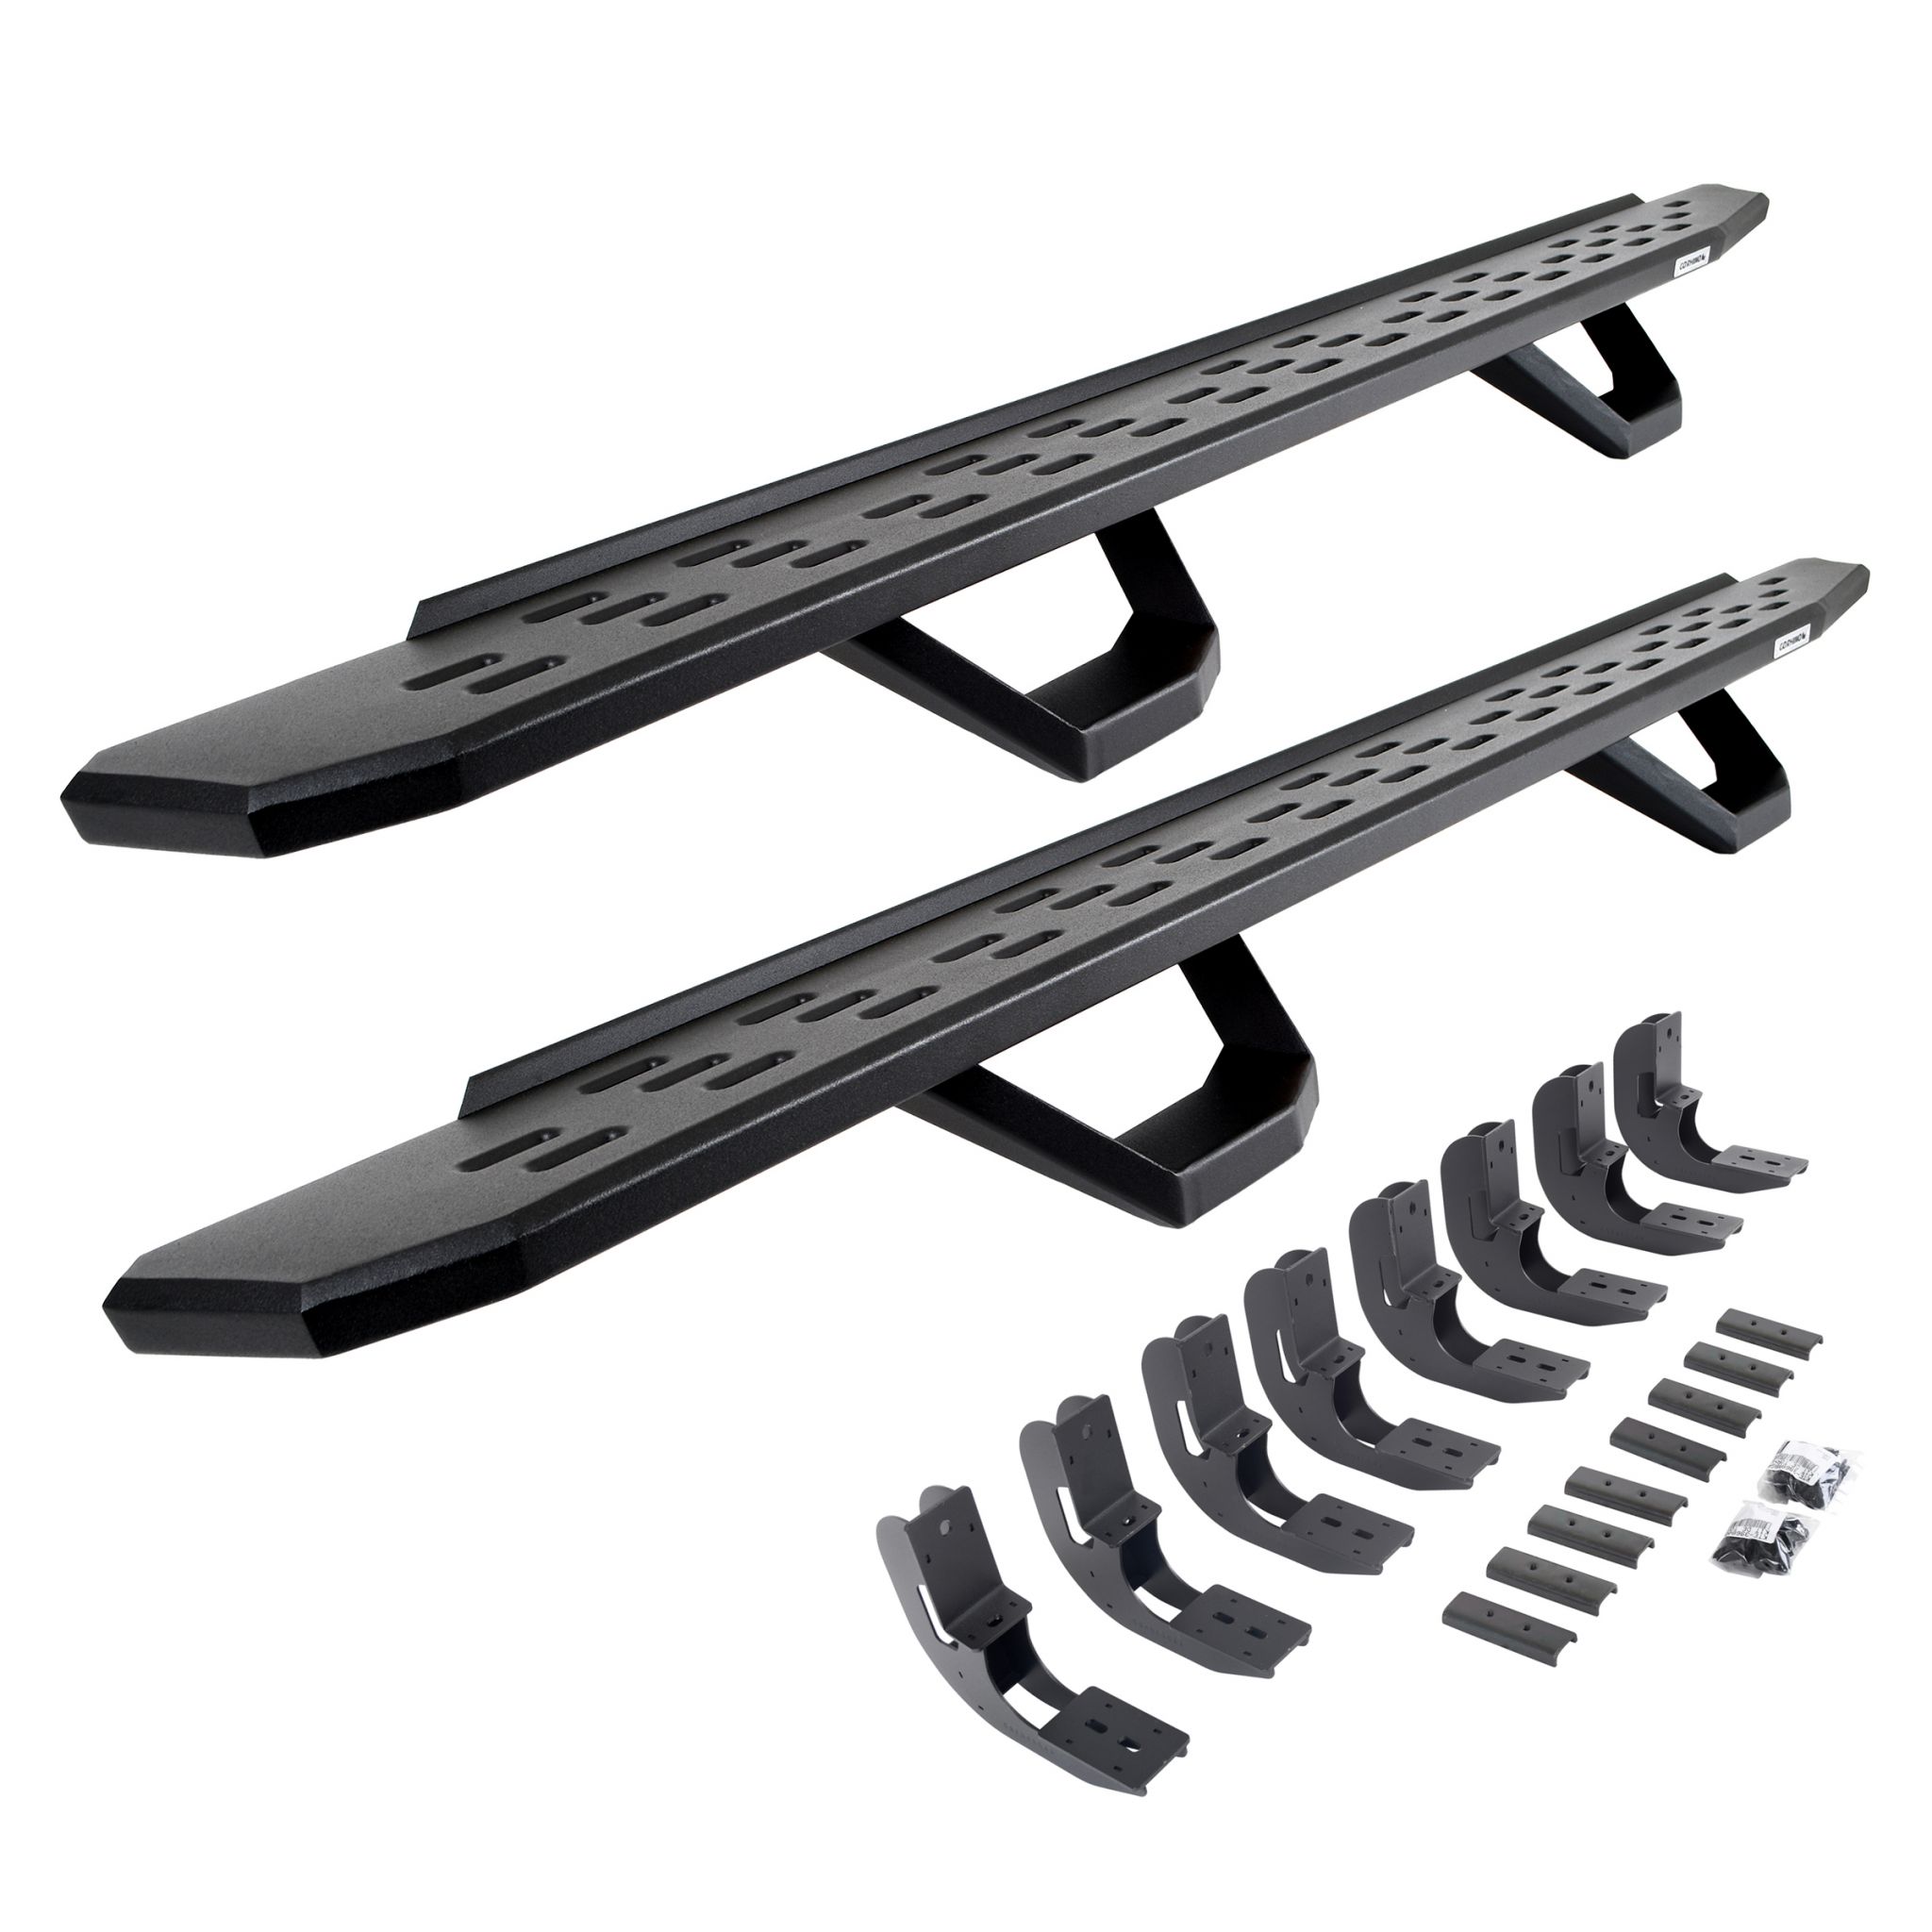 Go Rhino 6960488720PC - RB30 Running Boards with Mounting Brackets & 2 Pairs of Drops Steps Kit - Textured Black